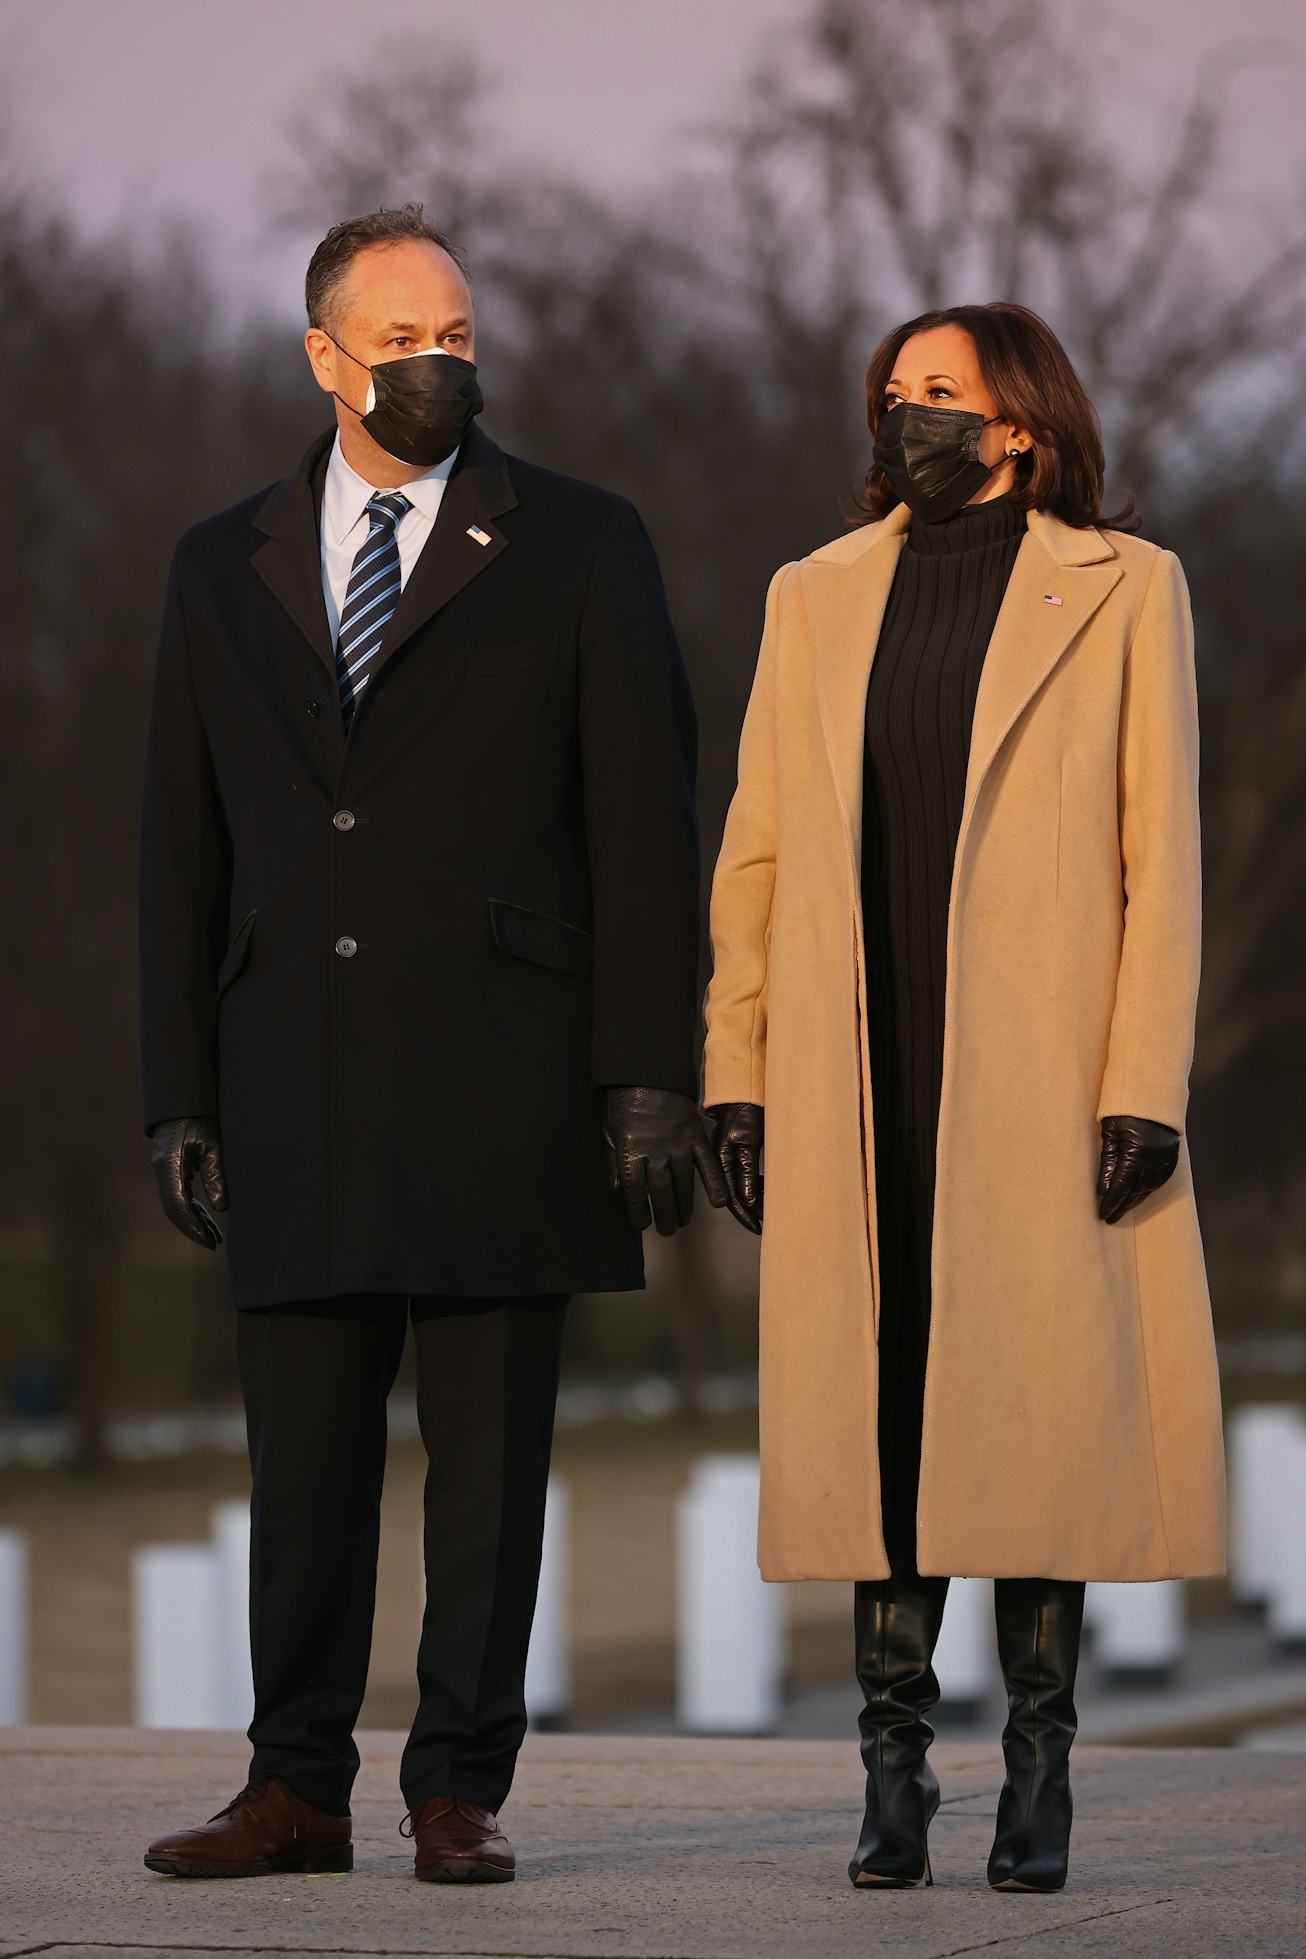 Kamala Harris at the COVID memorial during the the 2021 presidential inauguration.